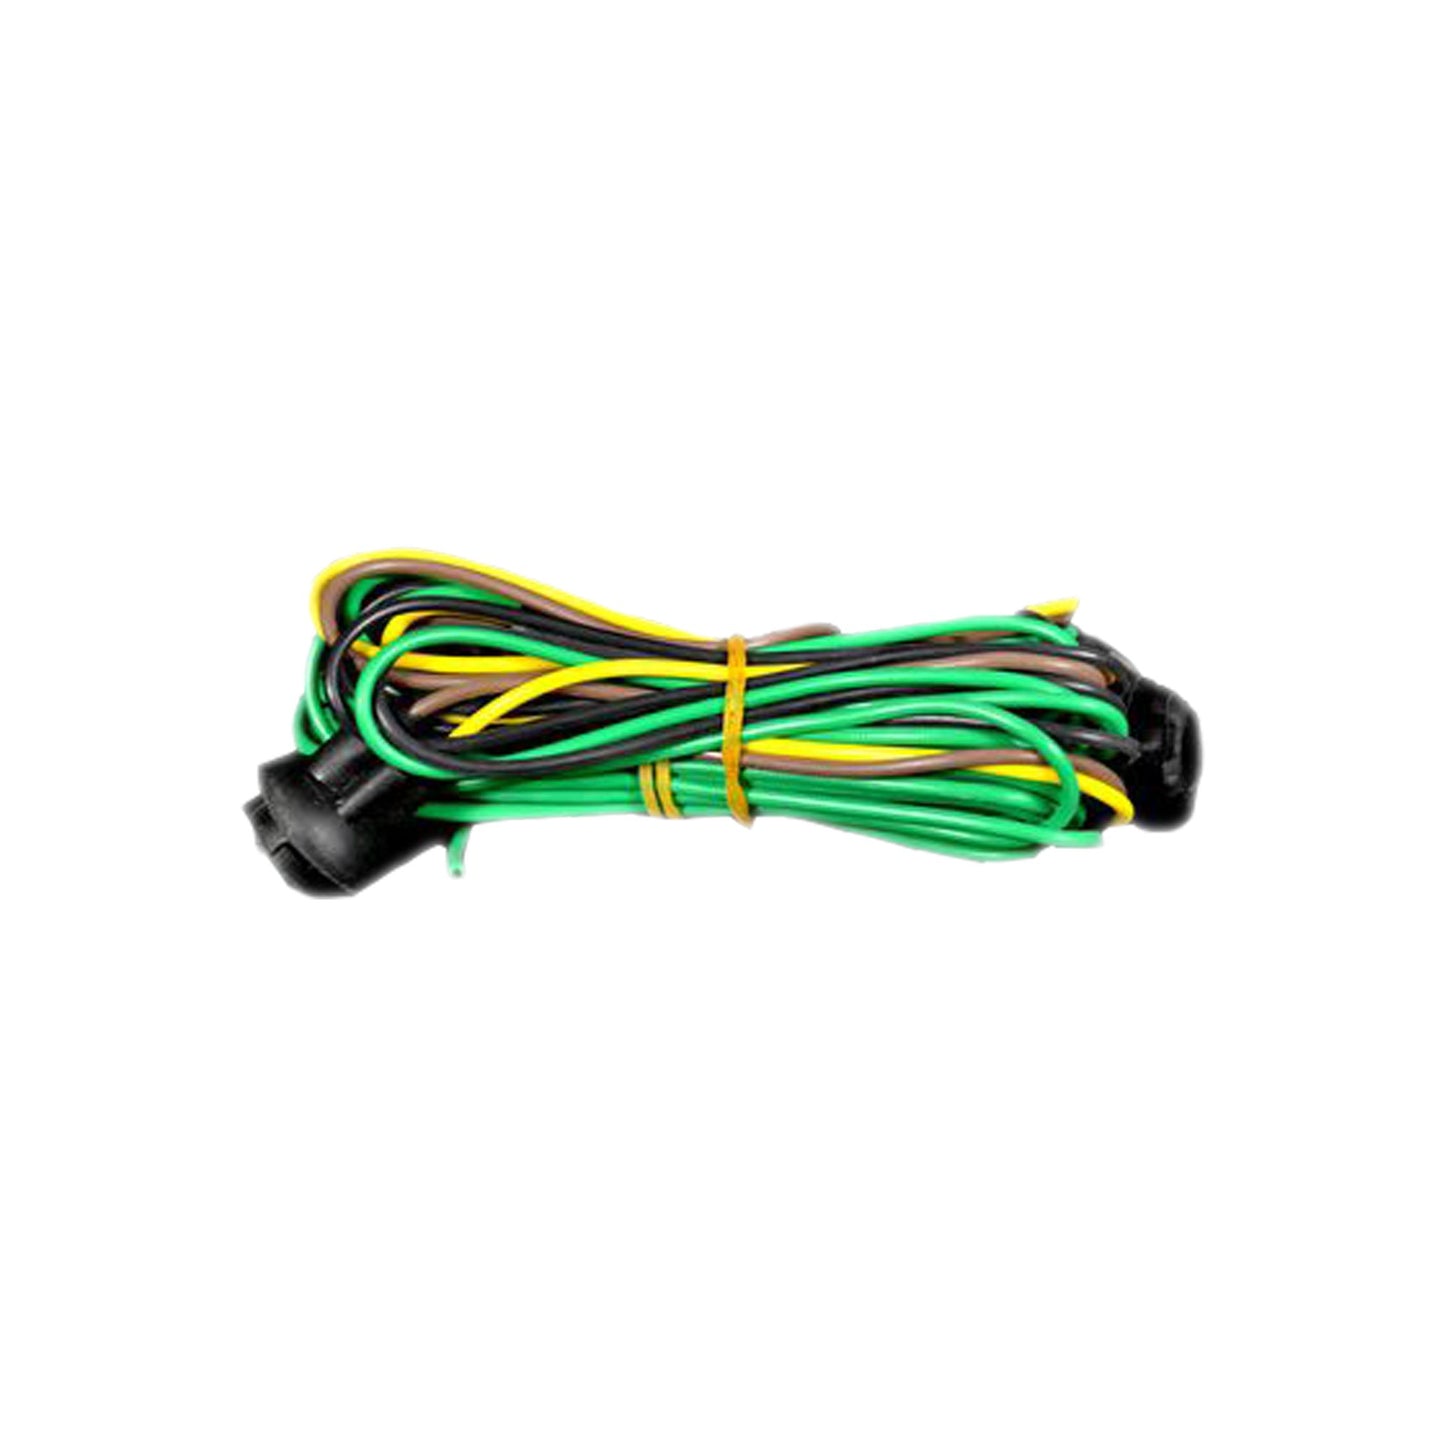 Wiring/Hardware Kit - Used to Install Cab Lights on Vehicle That Didnt Have OEM Cab Lights - GMC SIERRA/Chevy SILVERADO 2015-2019 HD